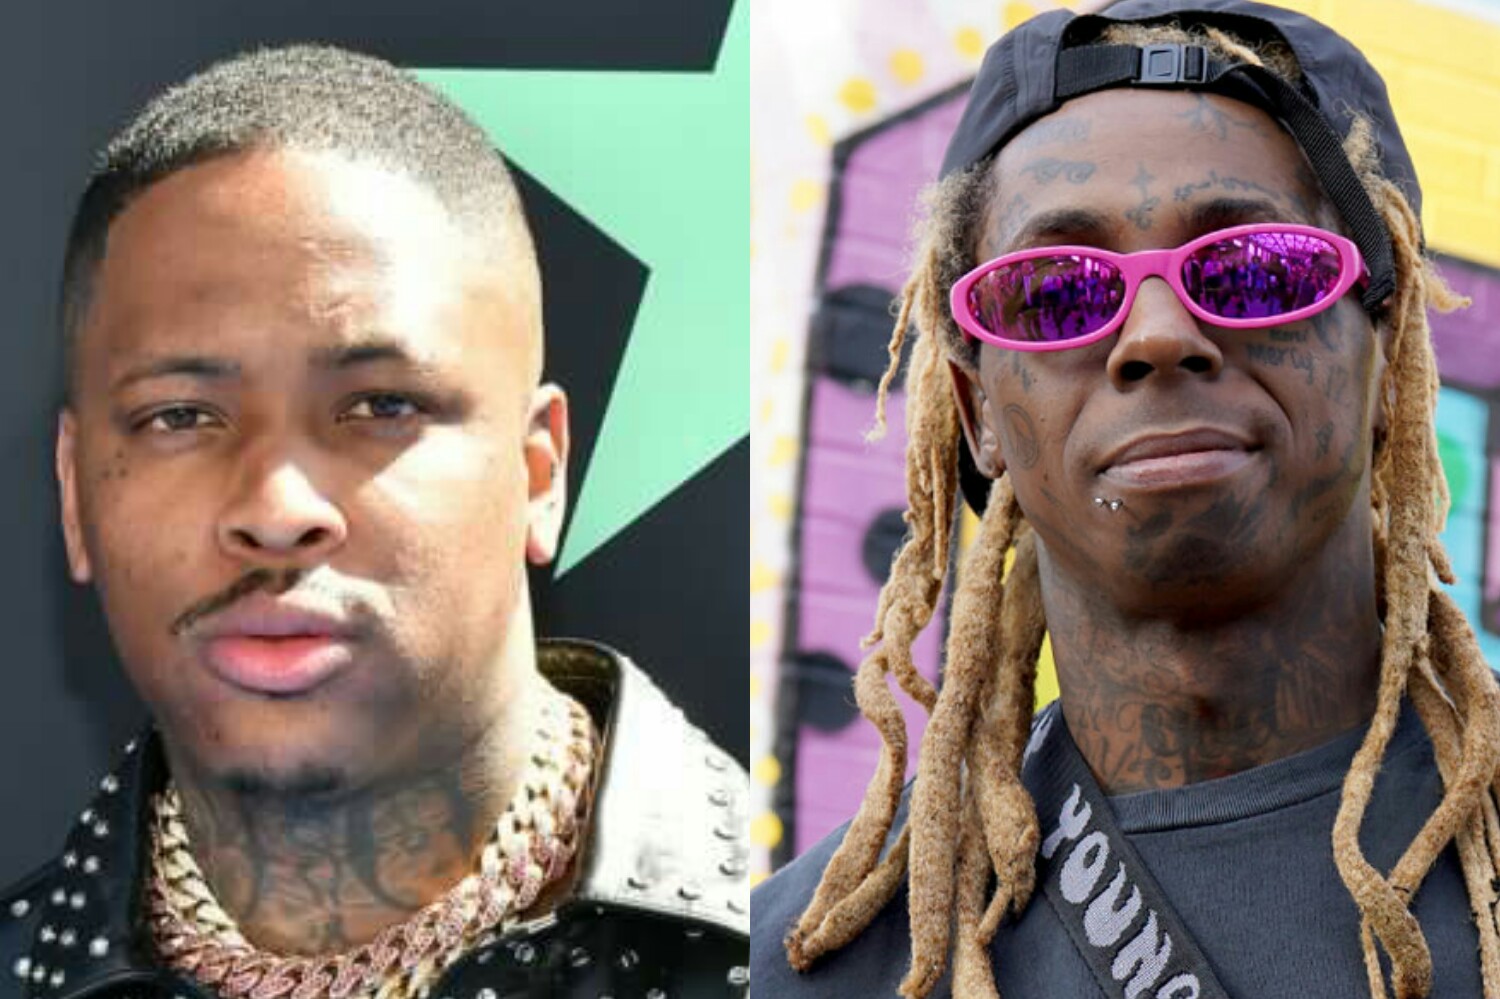 YG Features Lil Wayne On New Song For New Album